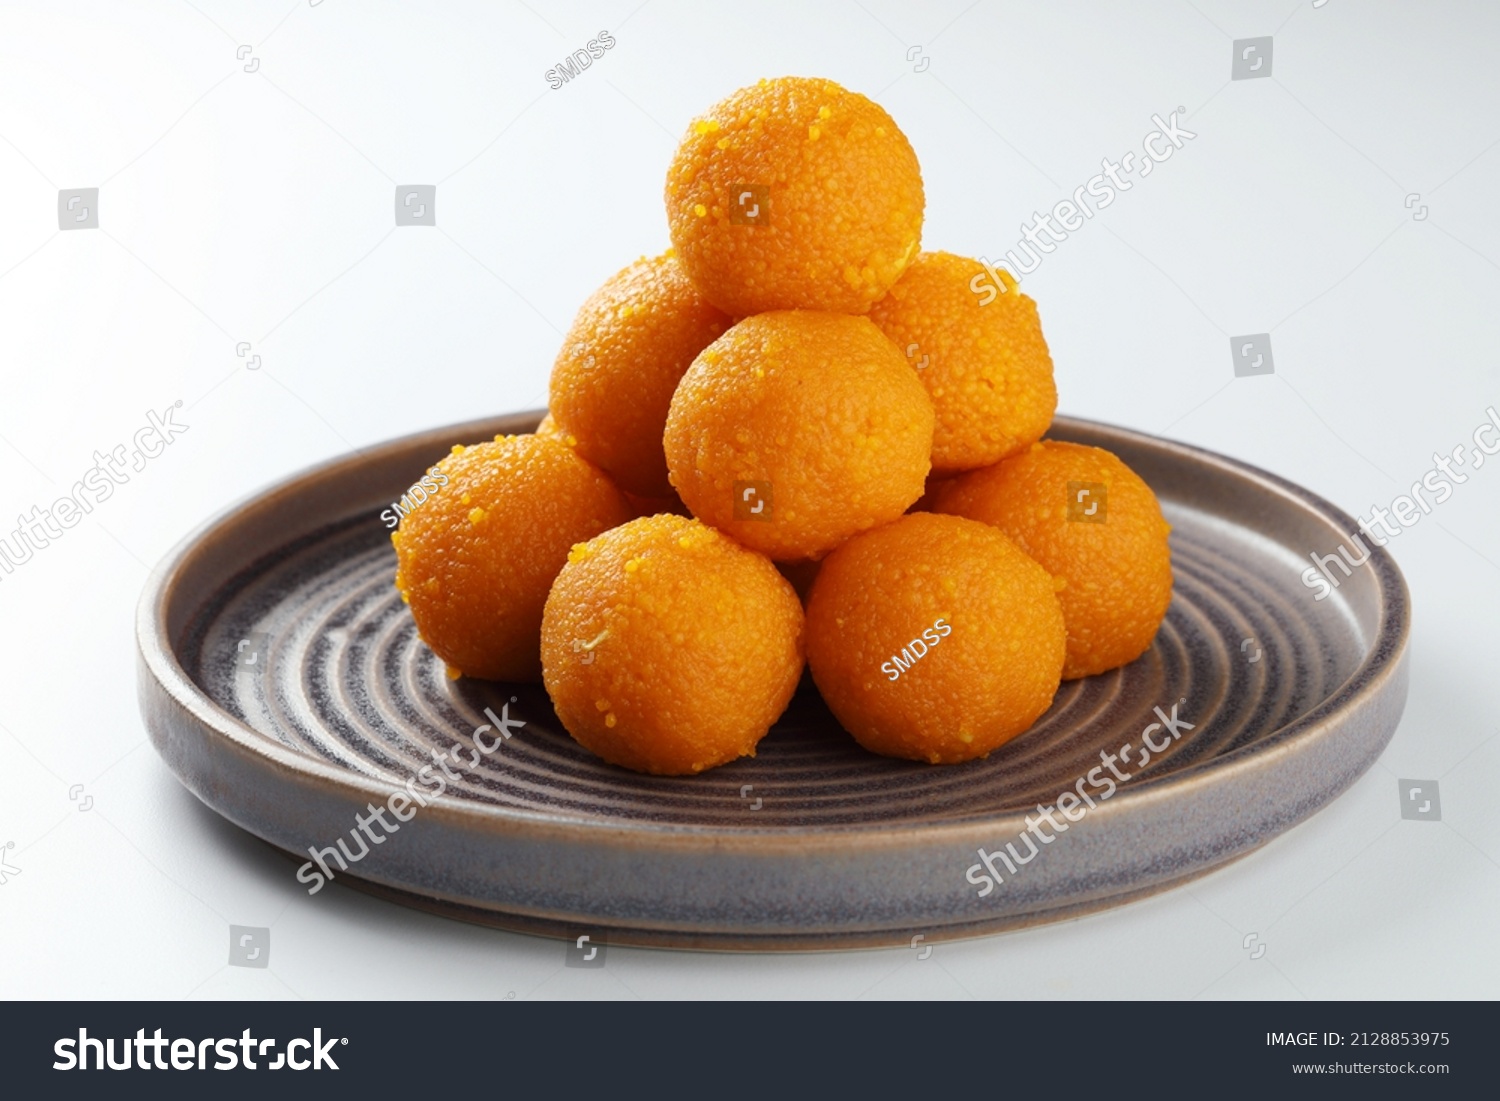 Indian Sweet Motichoor laddoo Also Know as Bundi Laddu or Motichur Laddoo Are Made of Very Small Gram Flour Balls or Boondis Which Are Deep Fried #2128853975